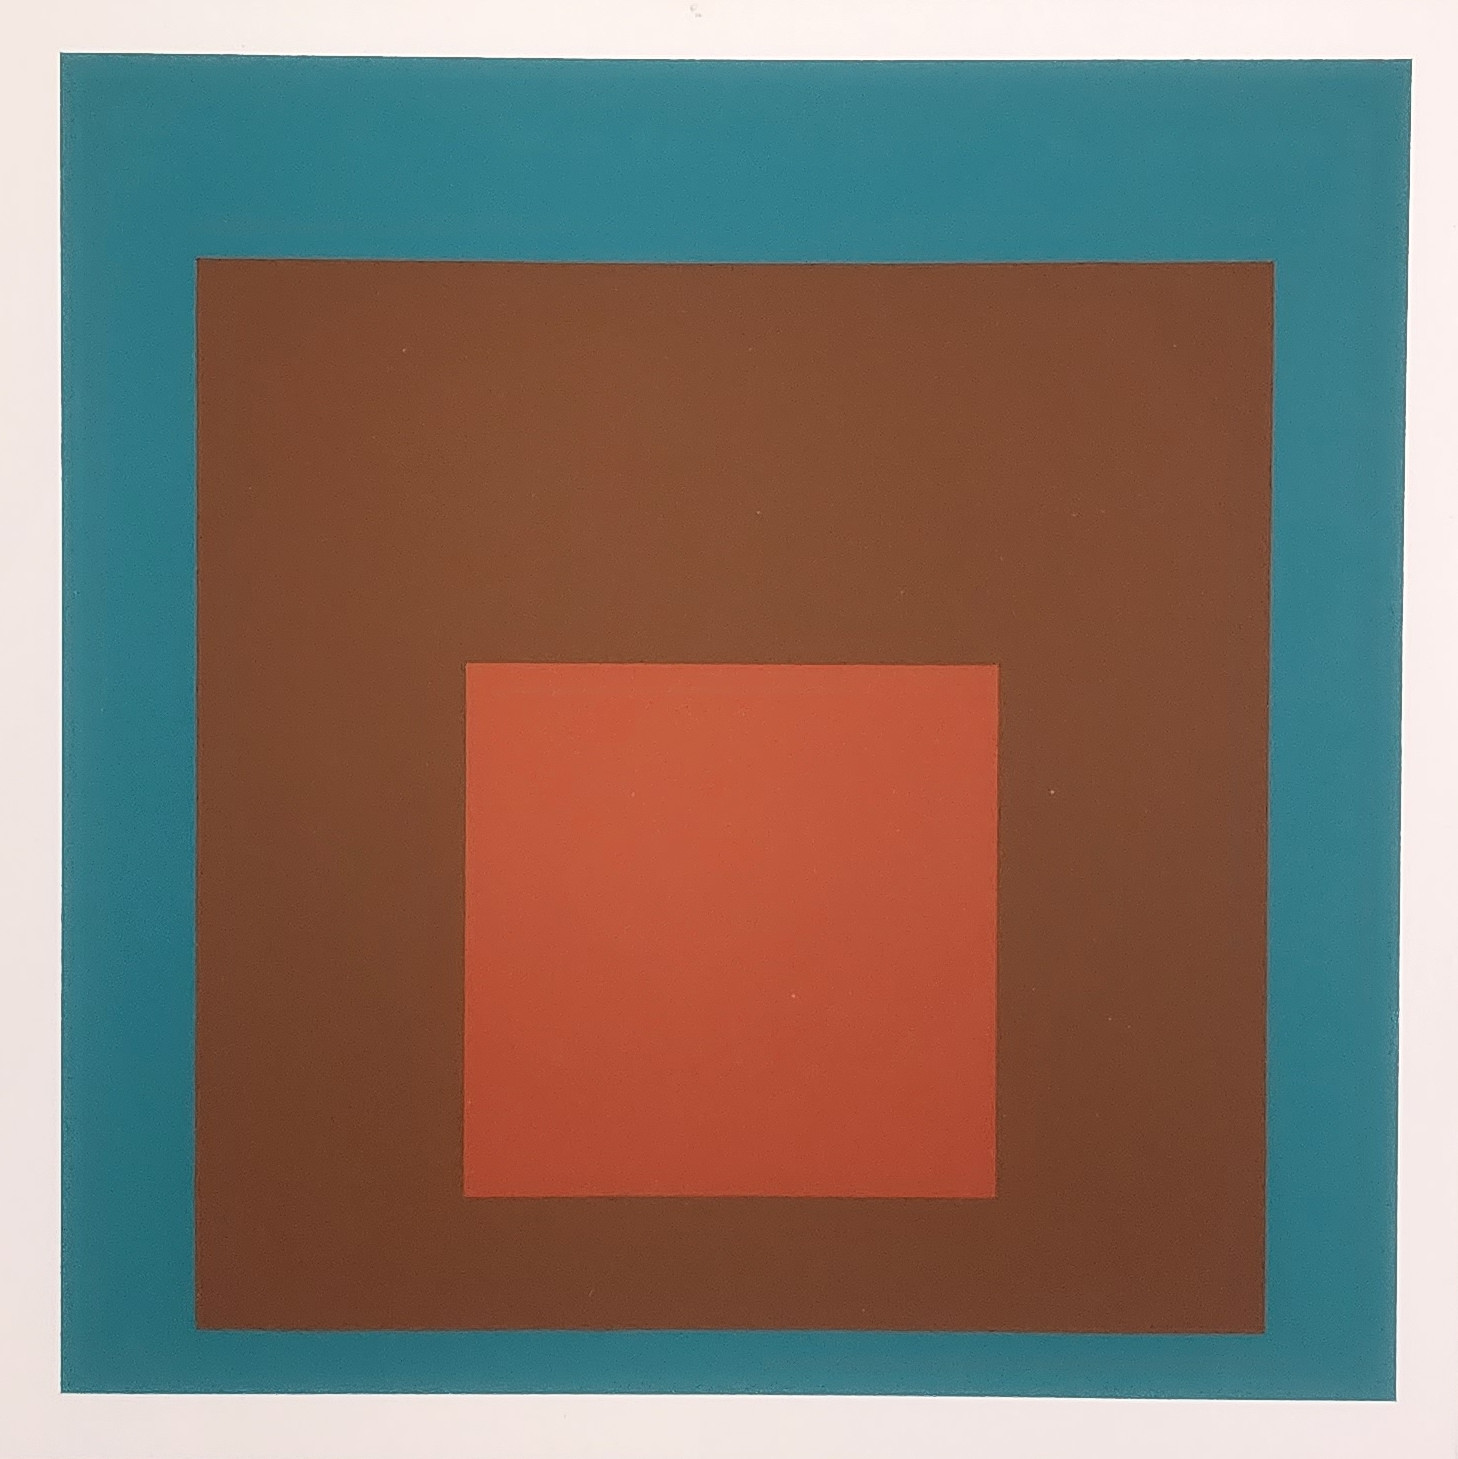 Homage to the Square: At Night - Josef Albers